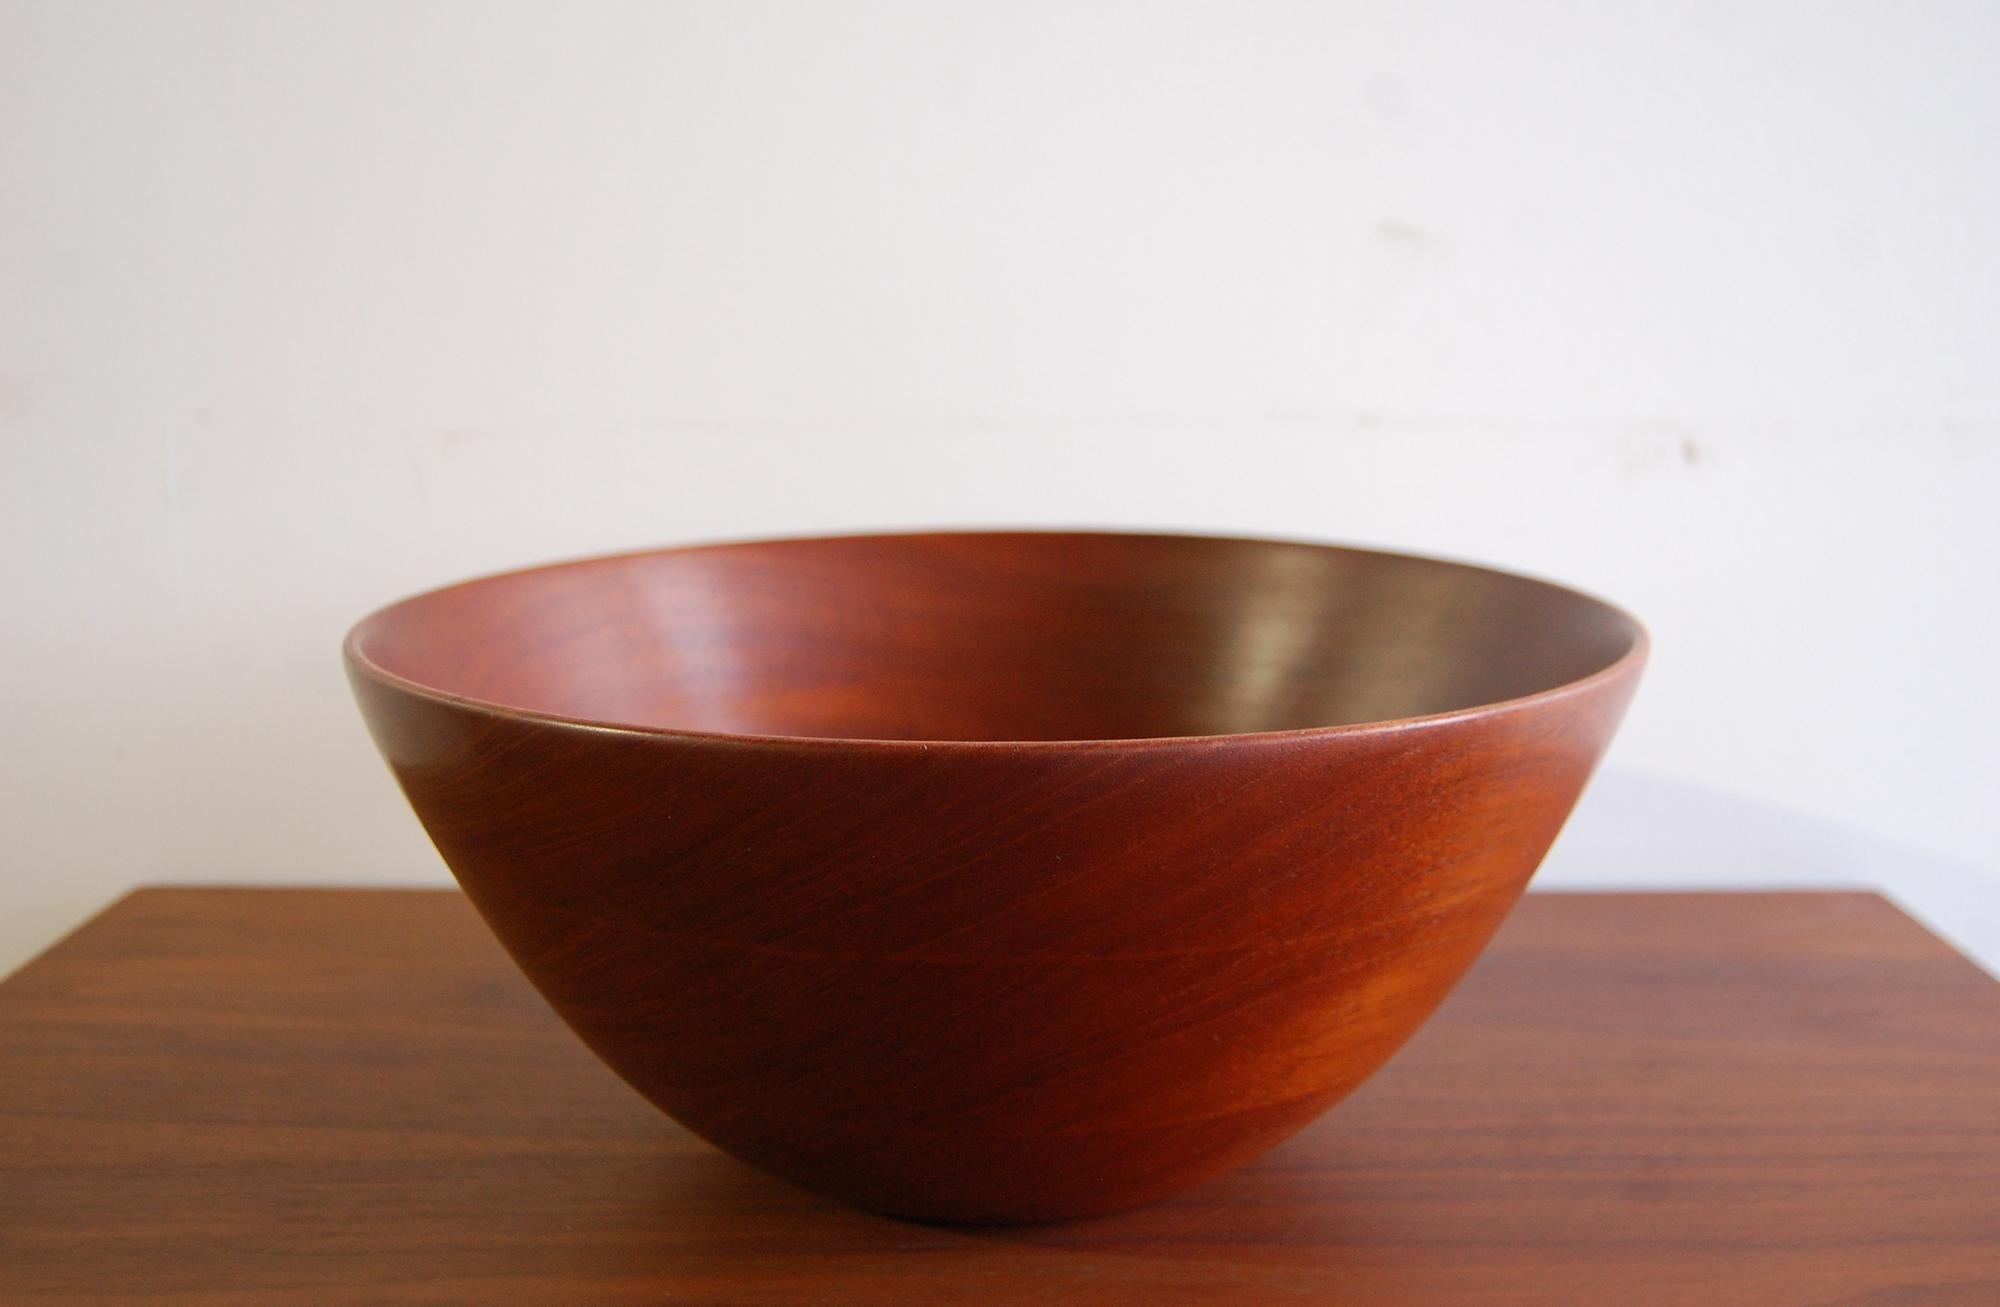 Large, and exquisitely turned Teak bowl by Frederik Lunning. Bowl measures 11 3/4